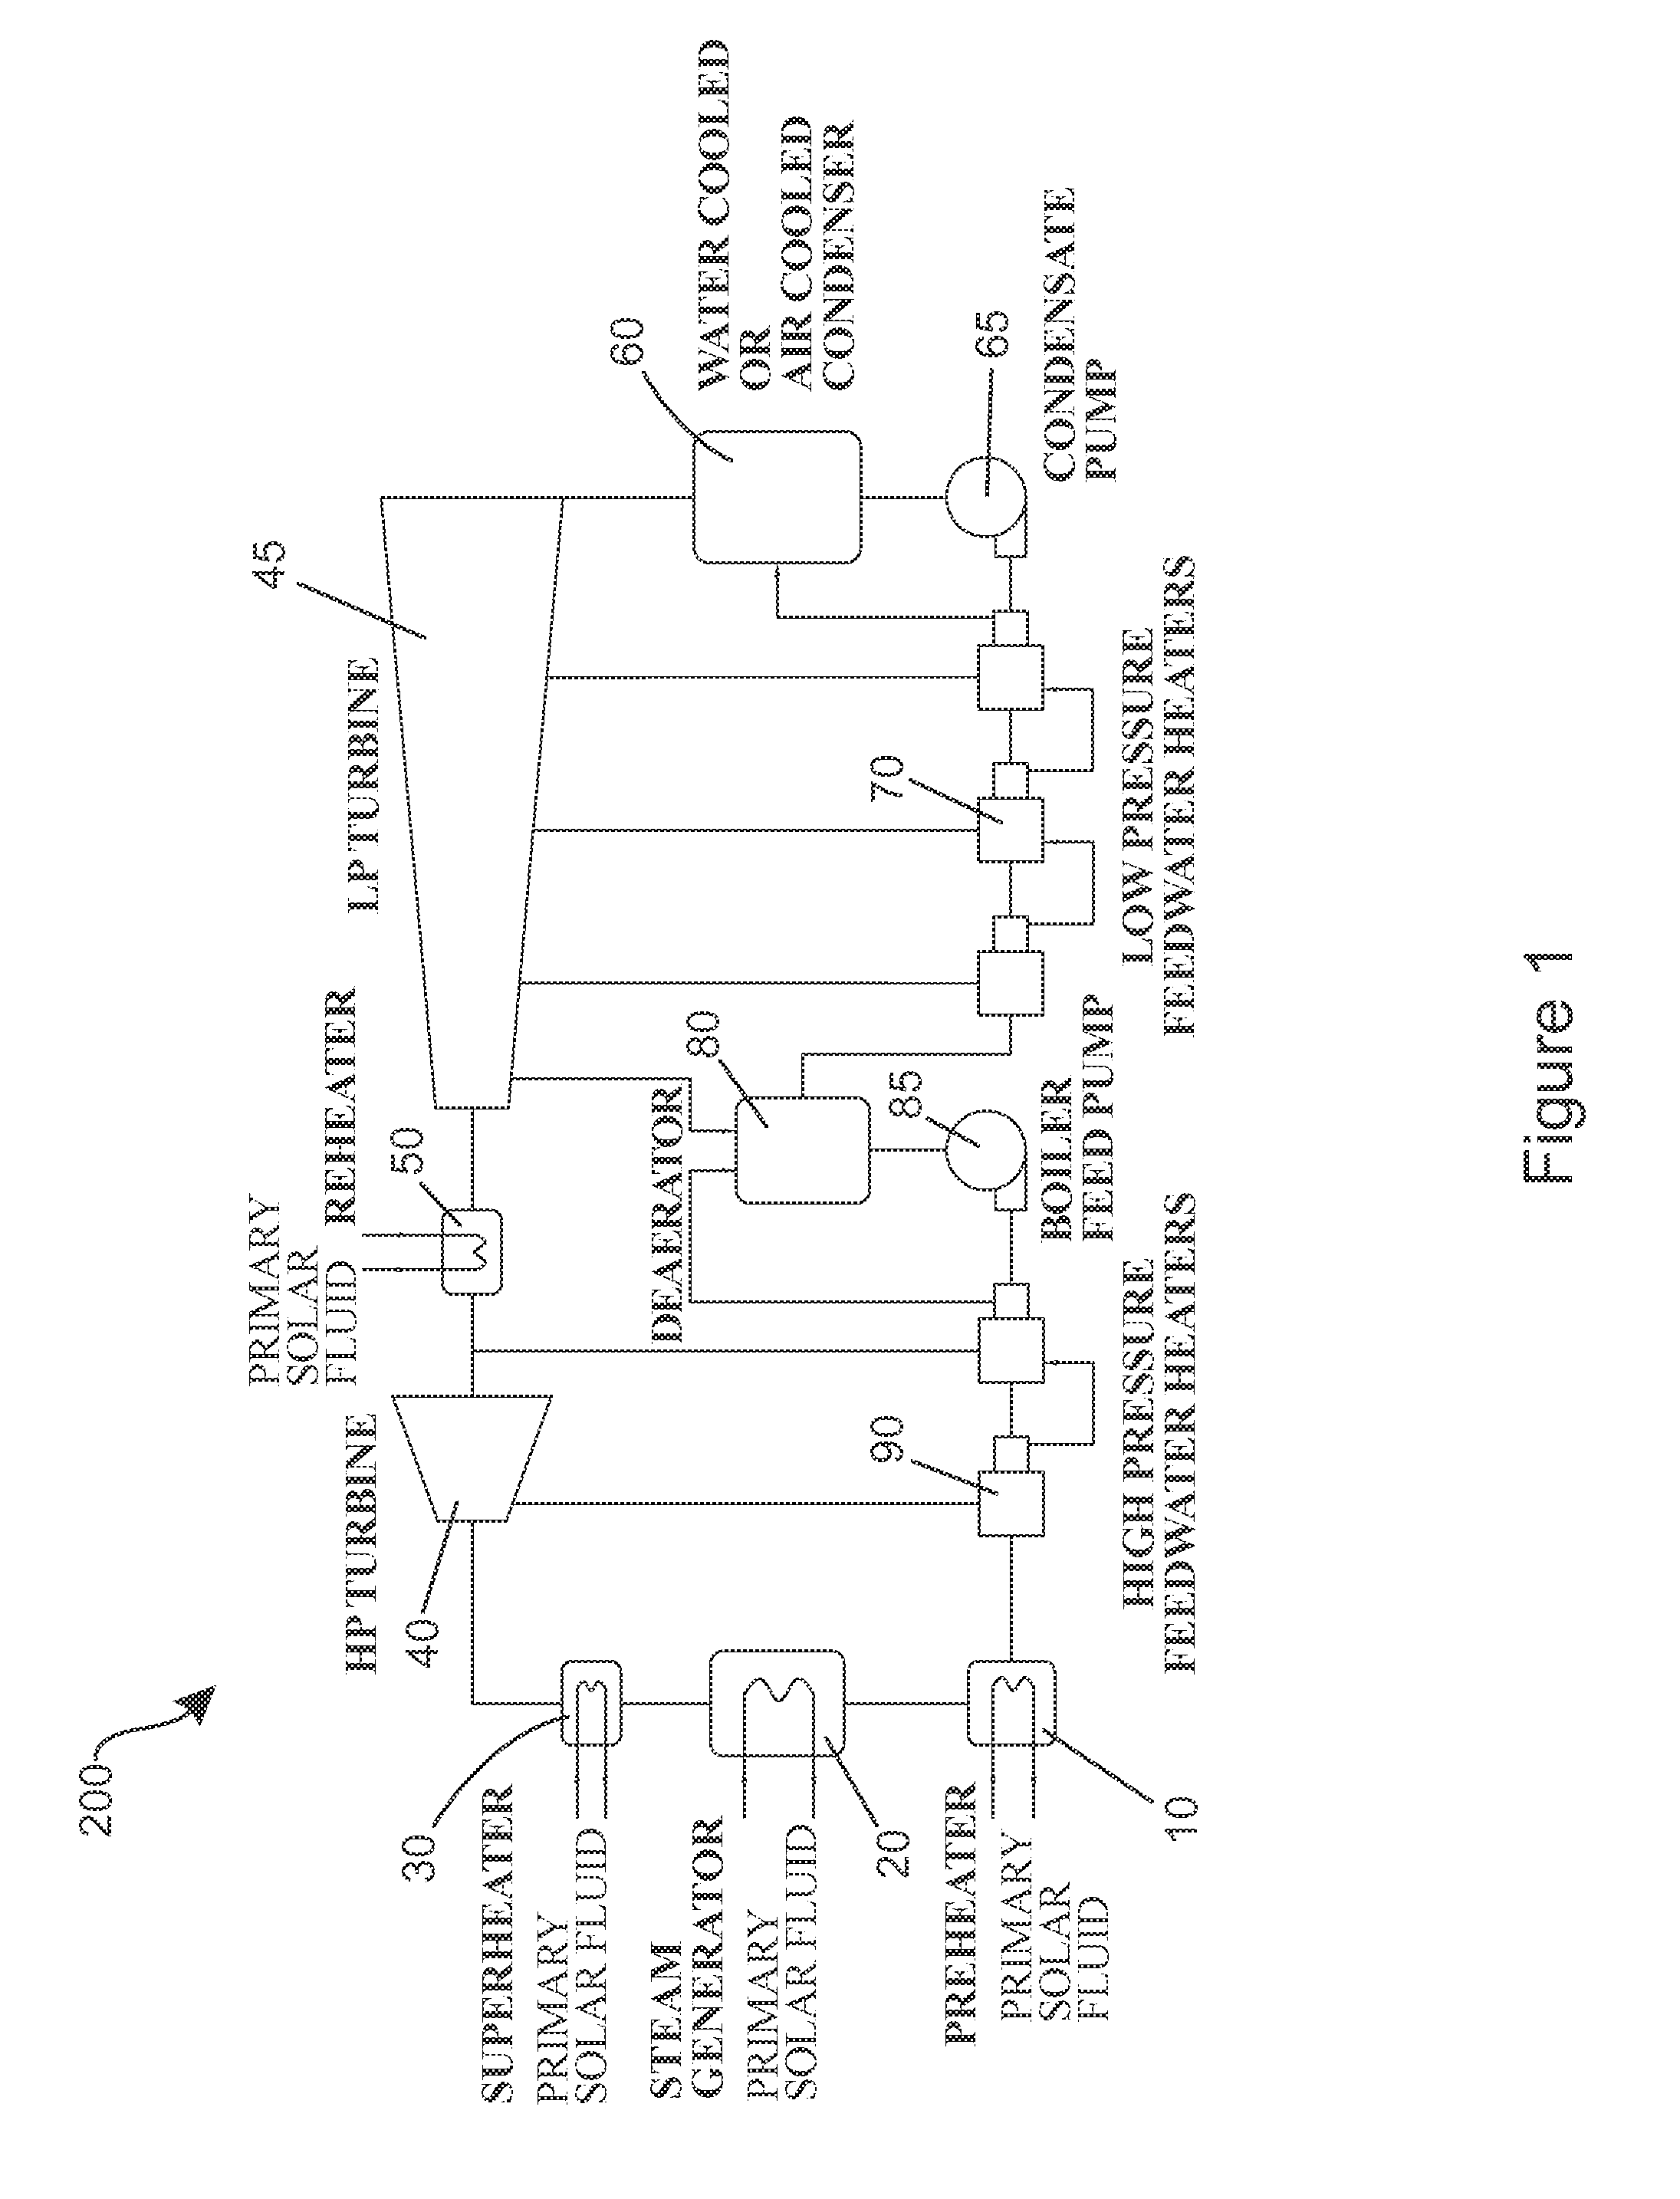 Heat exchanger apparatus for converting a shell-side liquid into a vapor